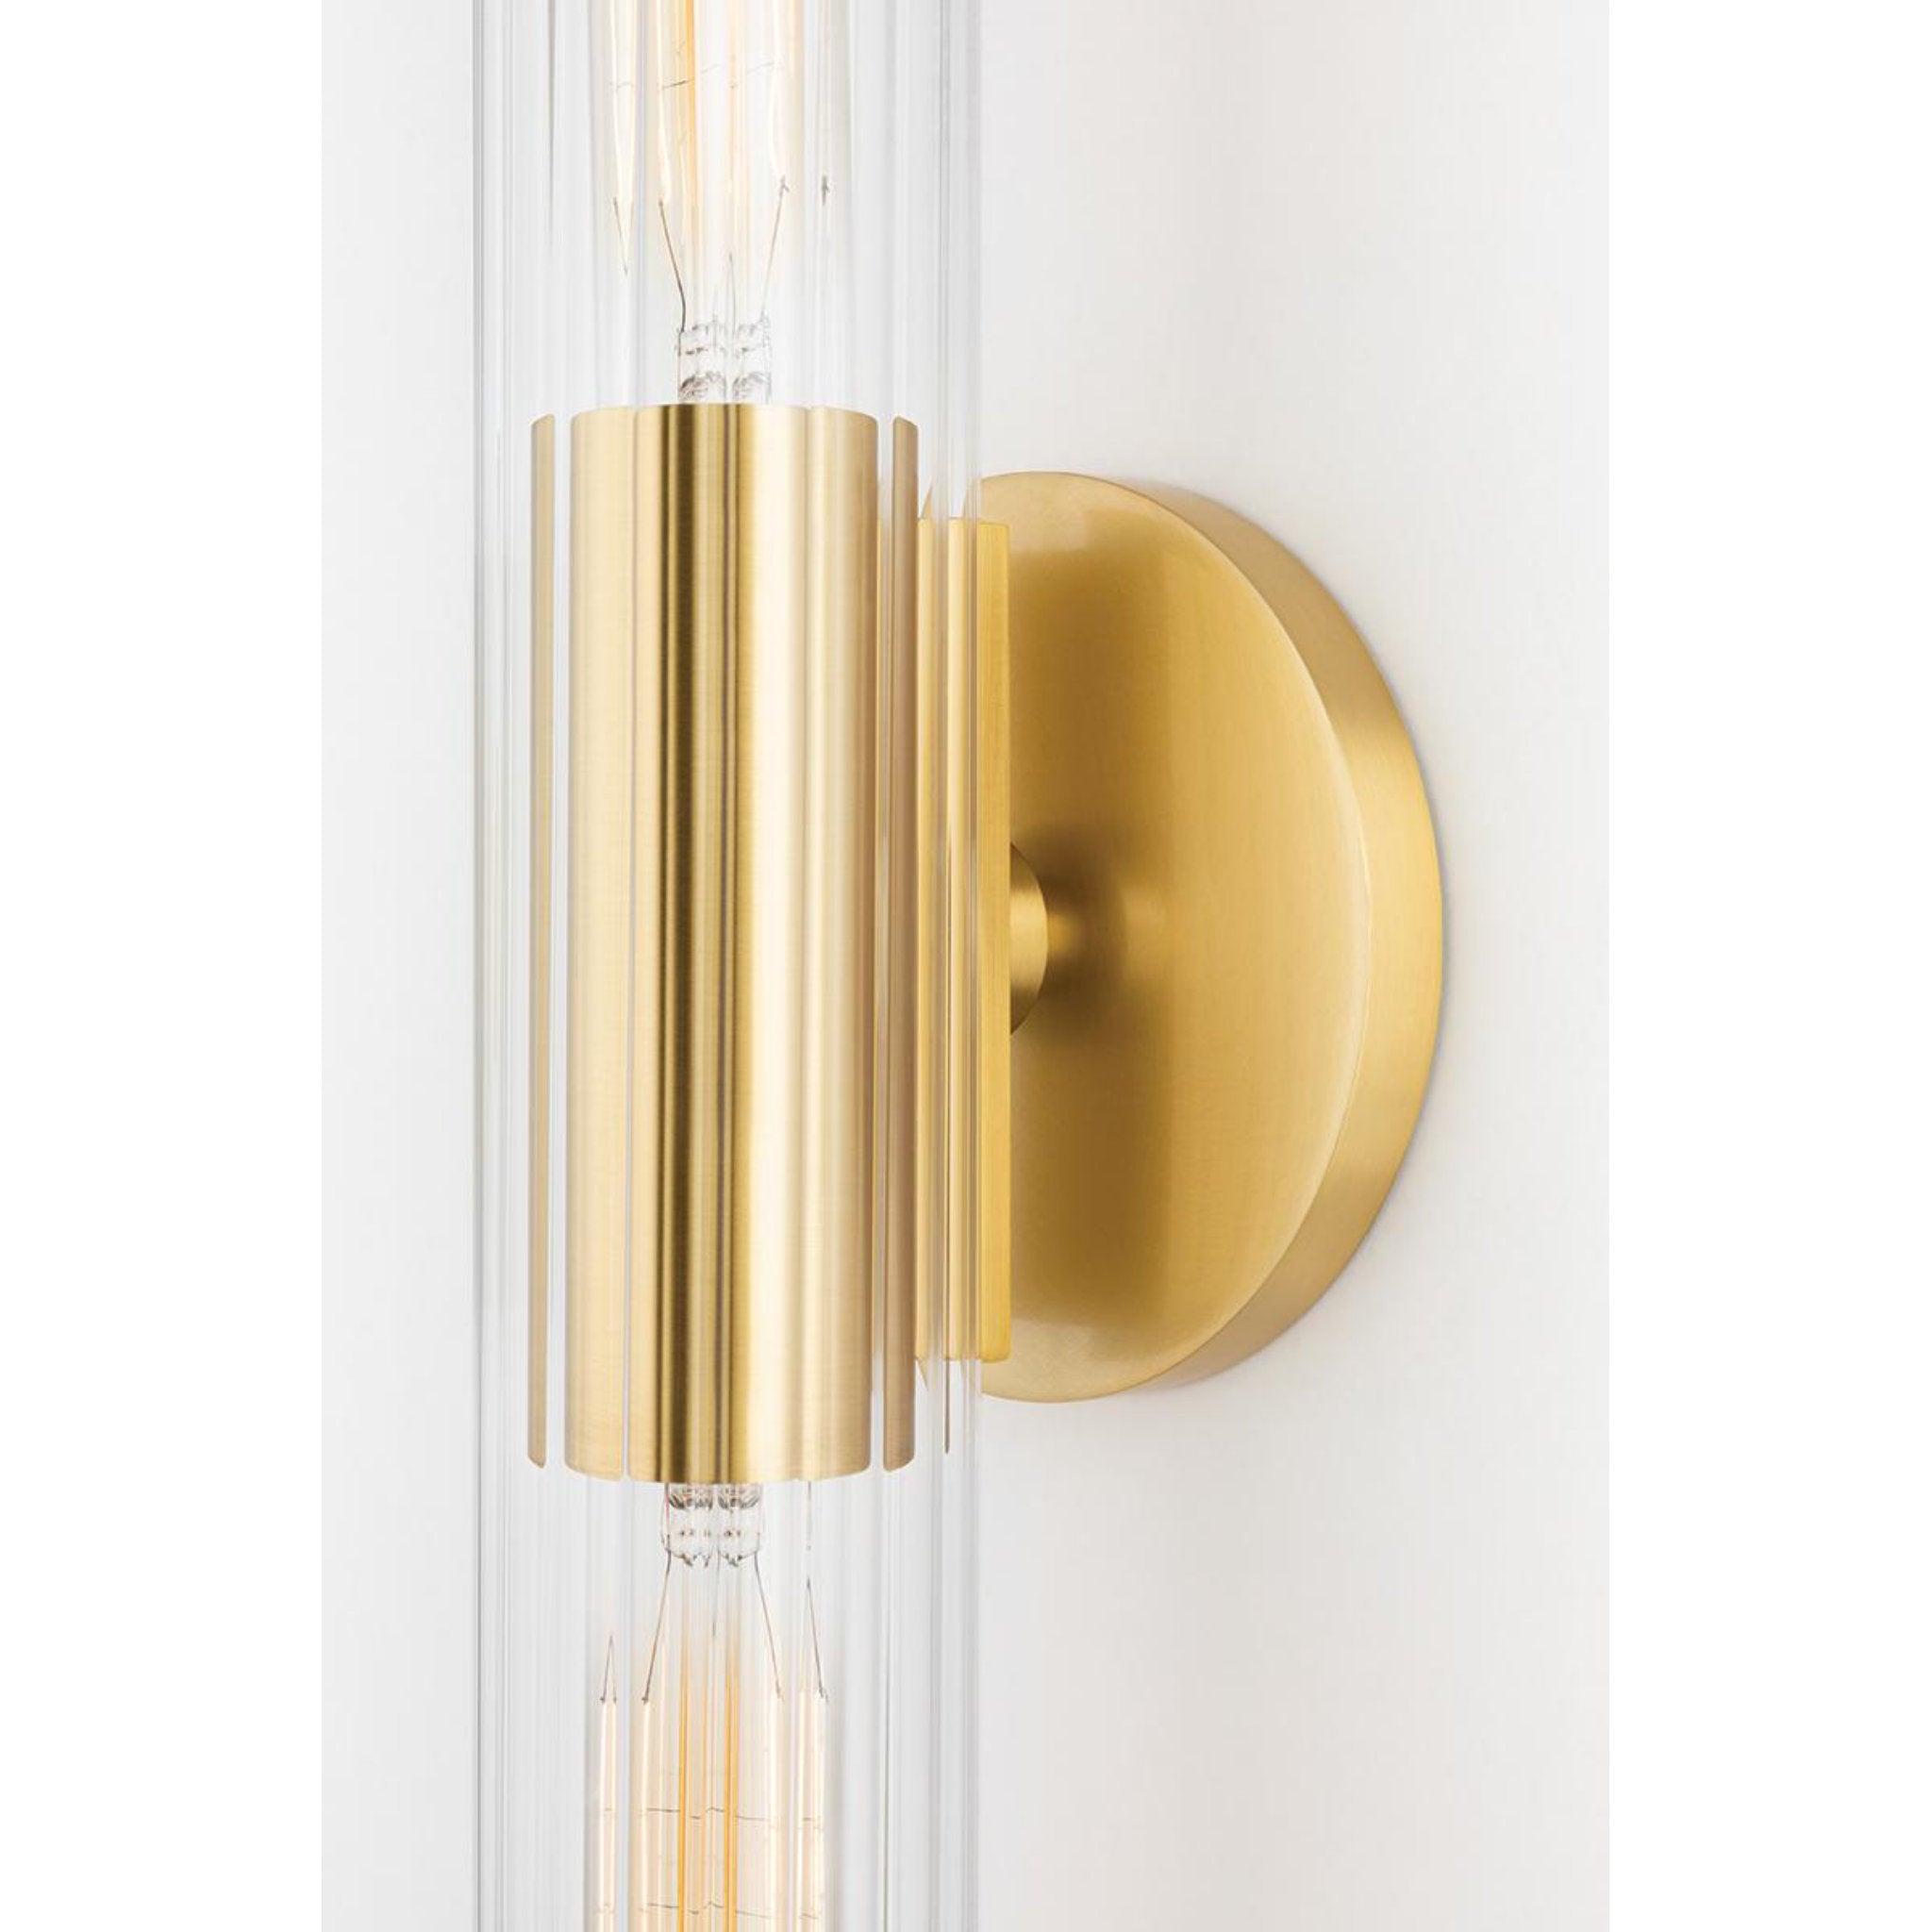 Cecily 2-Light Wall Sconce in Polished Nickel